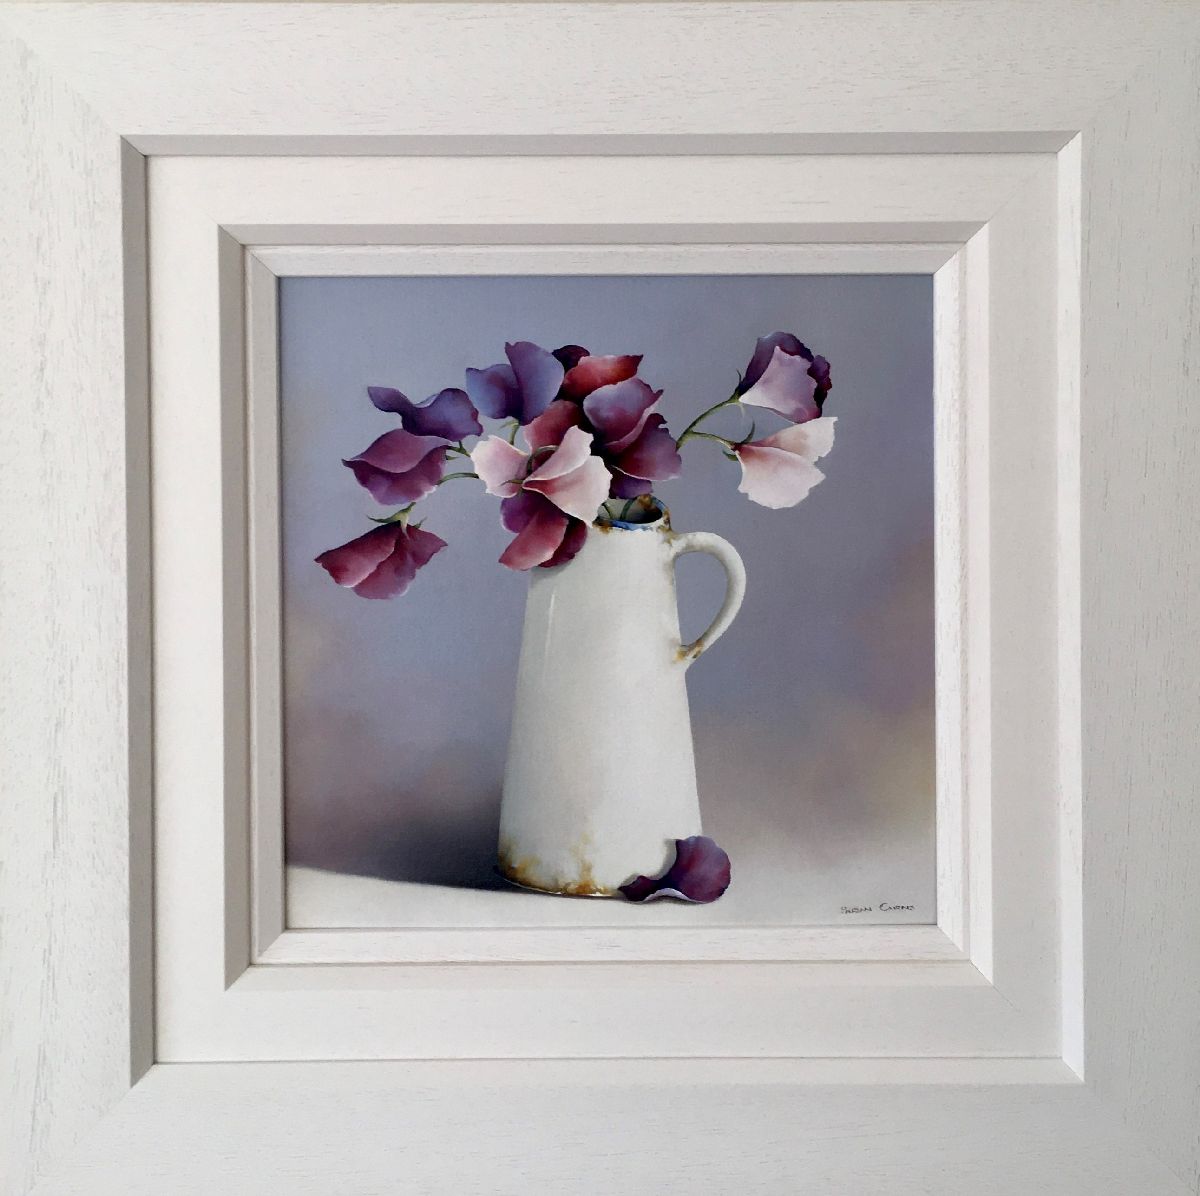 Sweet Pea by Susan Cairns